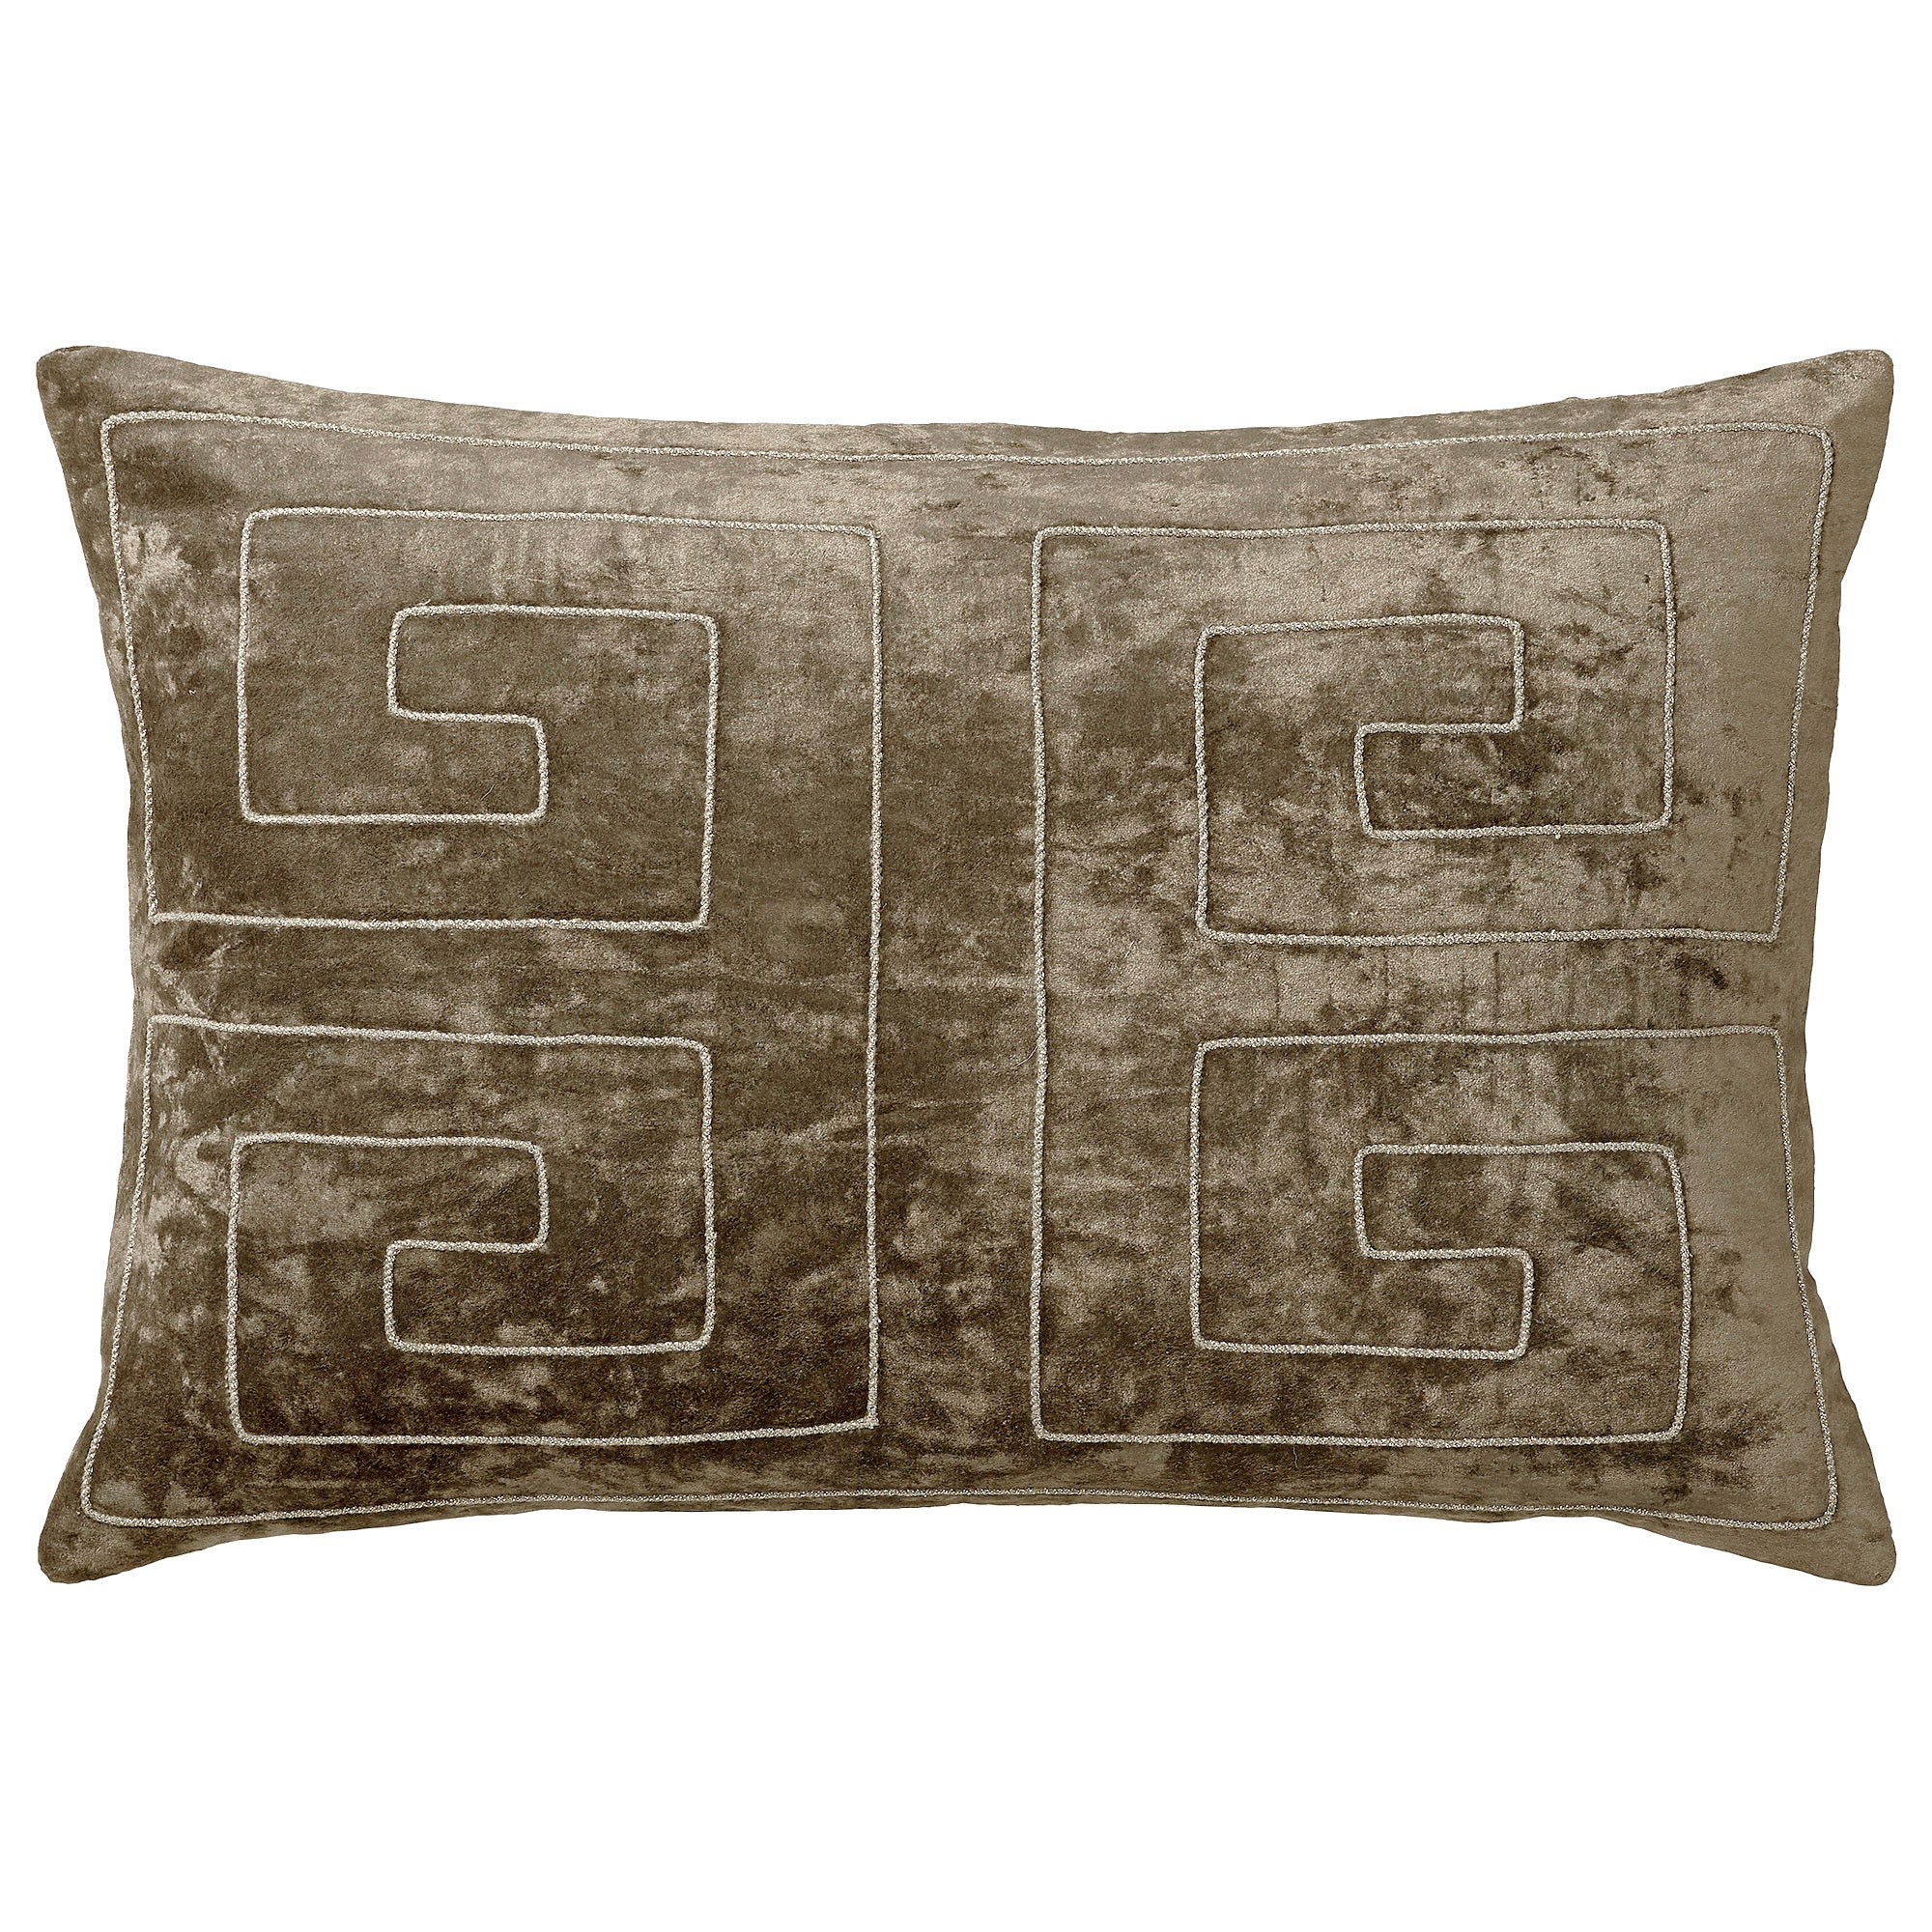 Lene Bjerre Emy Cushion filled with Duck feathers - 60x40cm